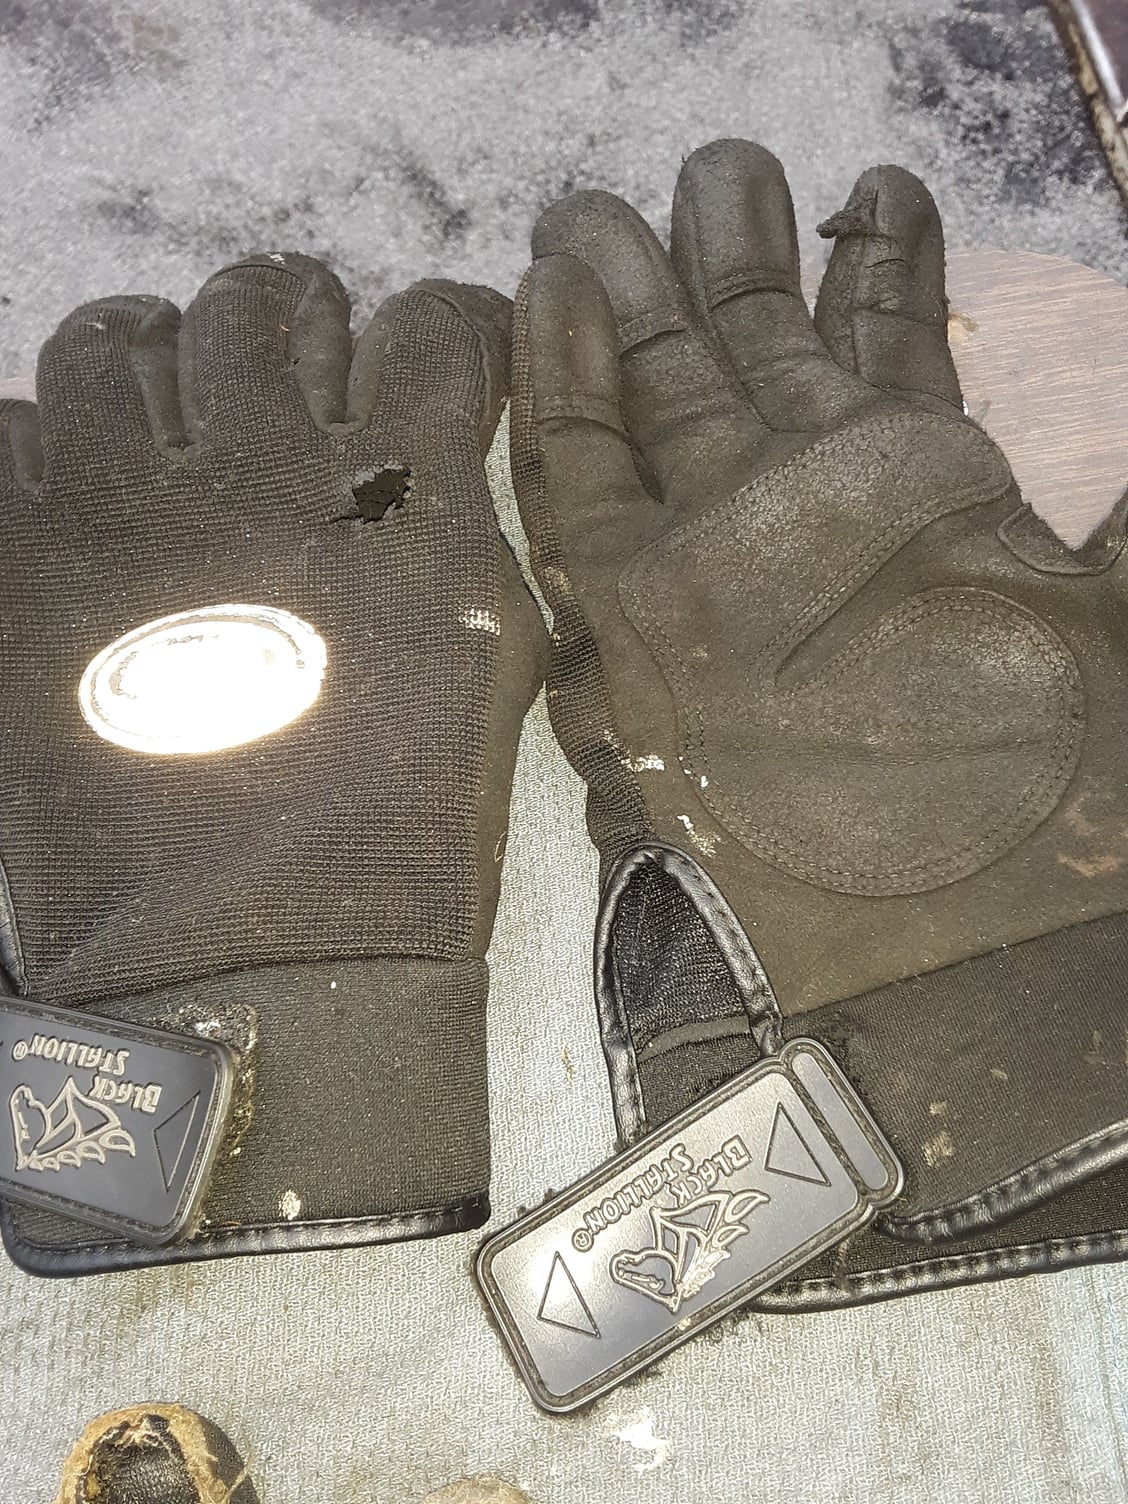 Inexpensive Wally world glove review time. - The Hull Truth - Boating ...